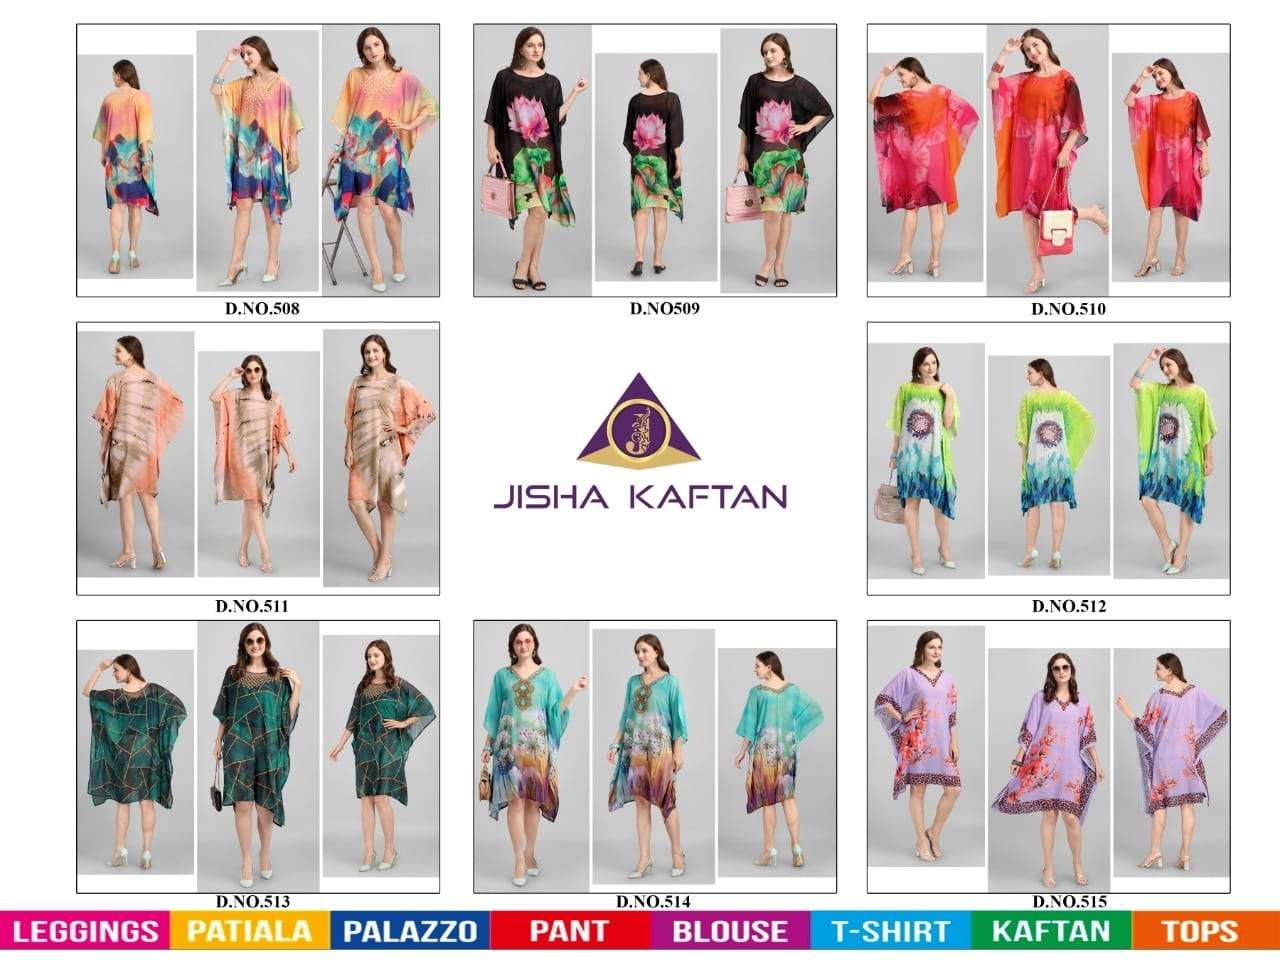 BEACH WEAR KAFTANS VOL-2 BY JELITE 508 TO 515 SERIES DESIGNER WEAR COLLECTION BEAUTIFUL STYLISH FANCY COLORFUL PARTY WEAR & OCCASIONAL WEAR WEIGHTLESS GEORGETTE PRINT GOWNS AT WHOLESALE PRICE